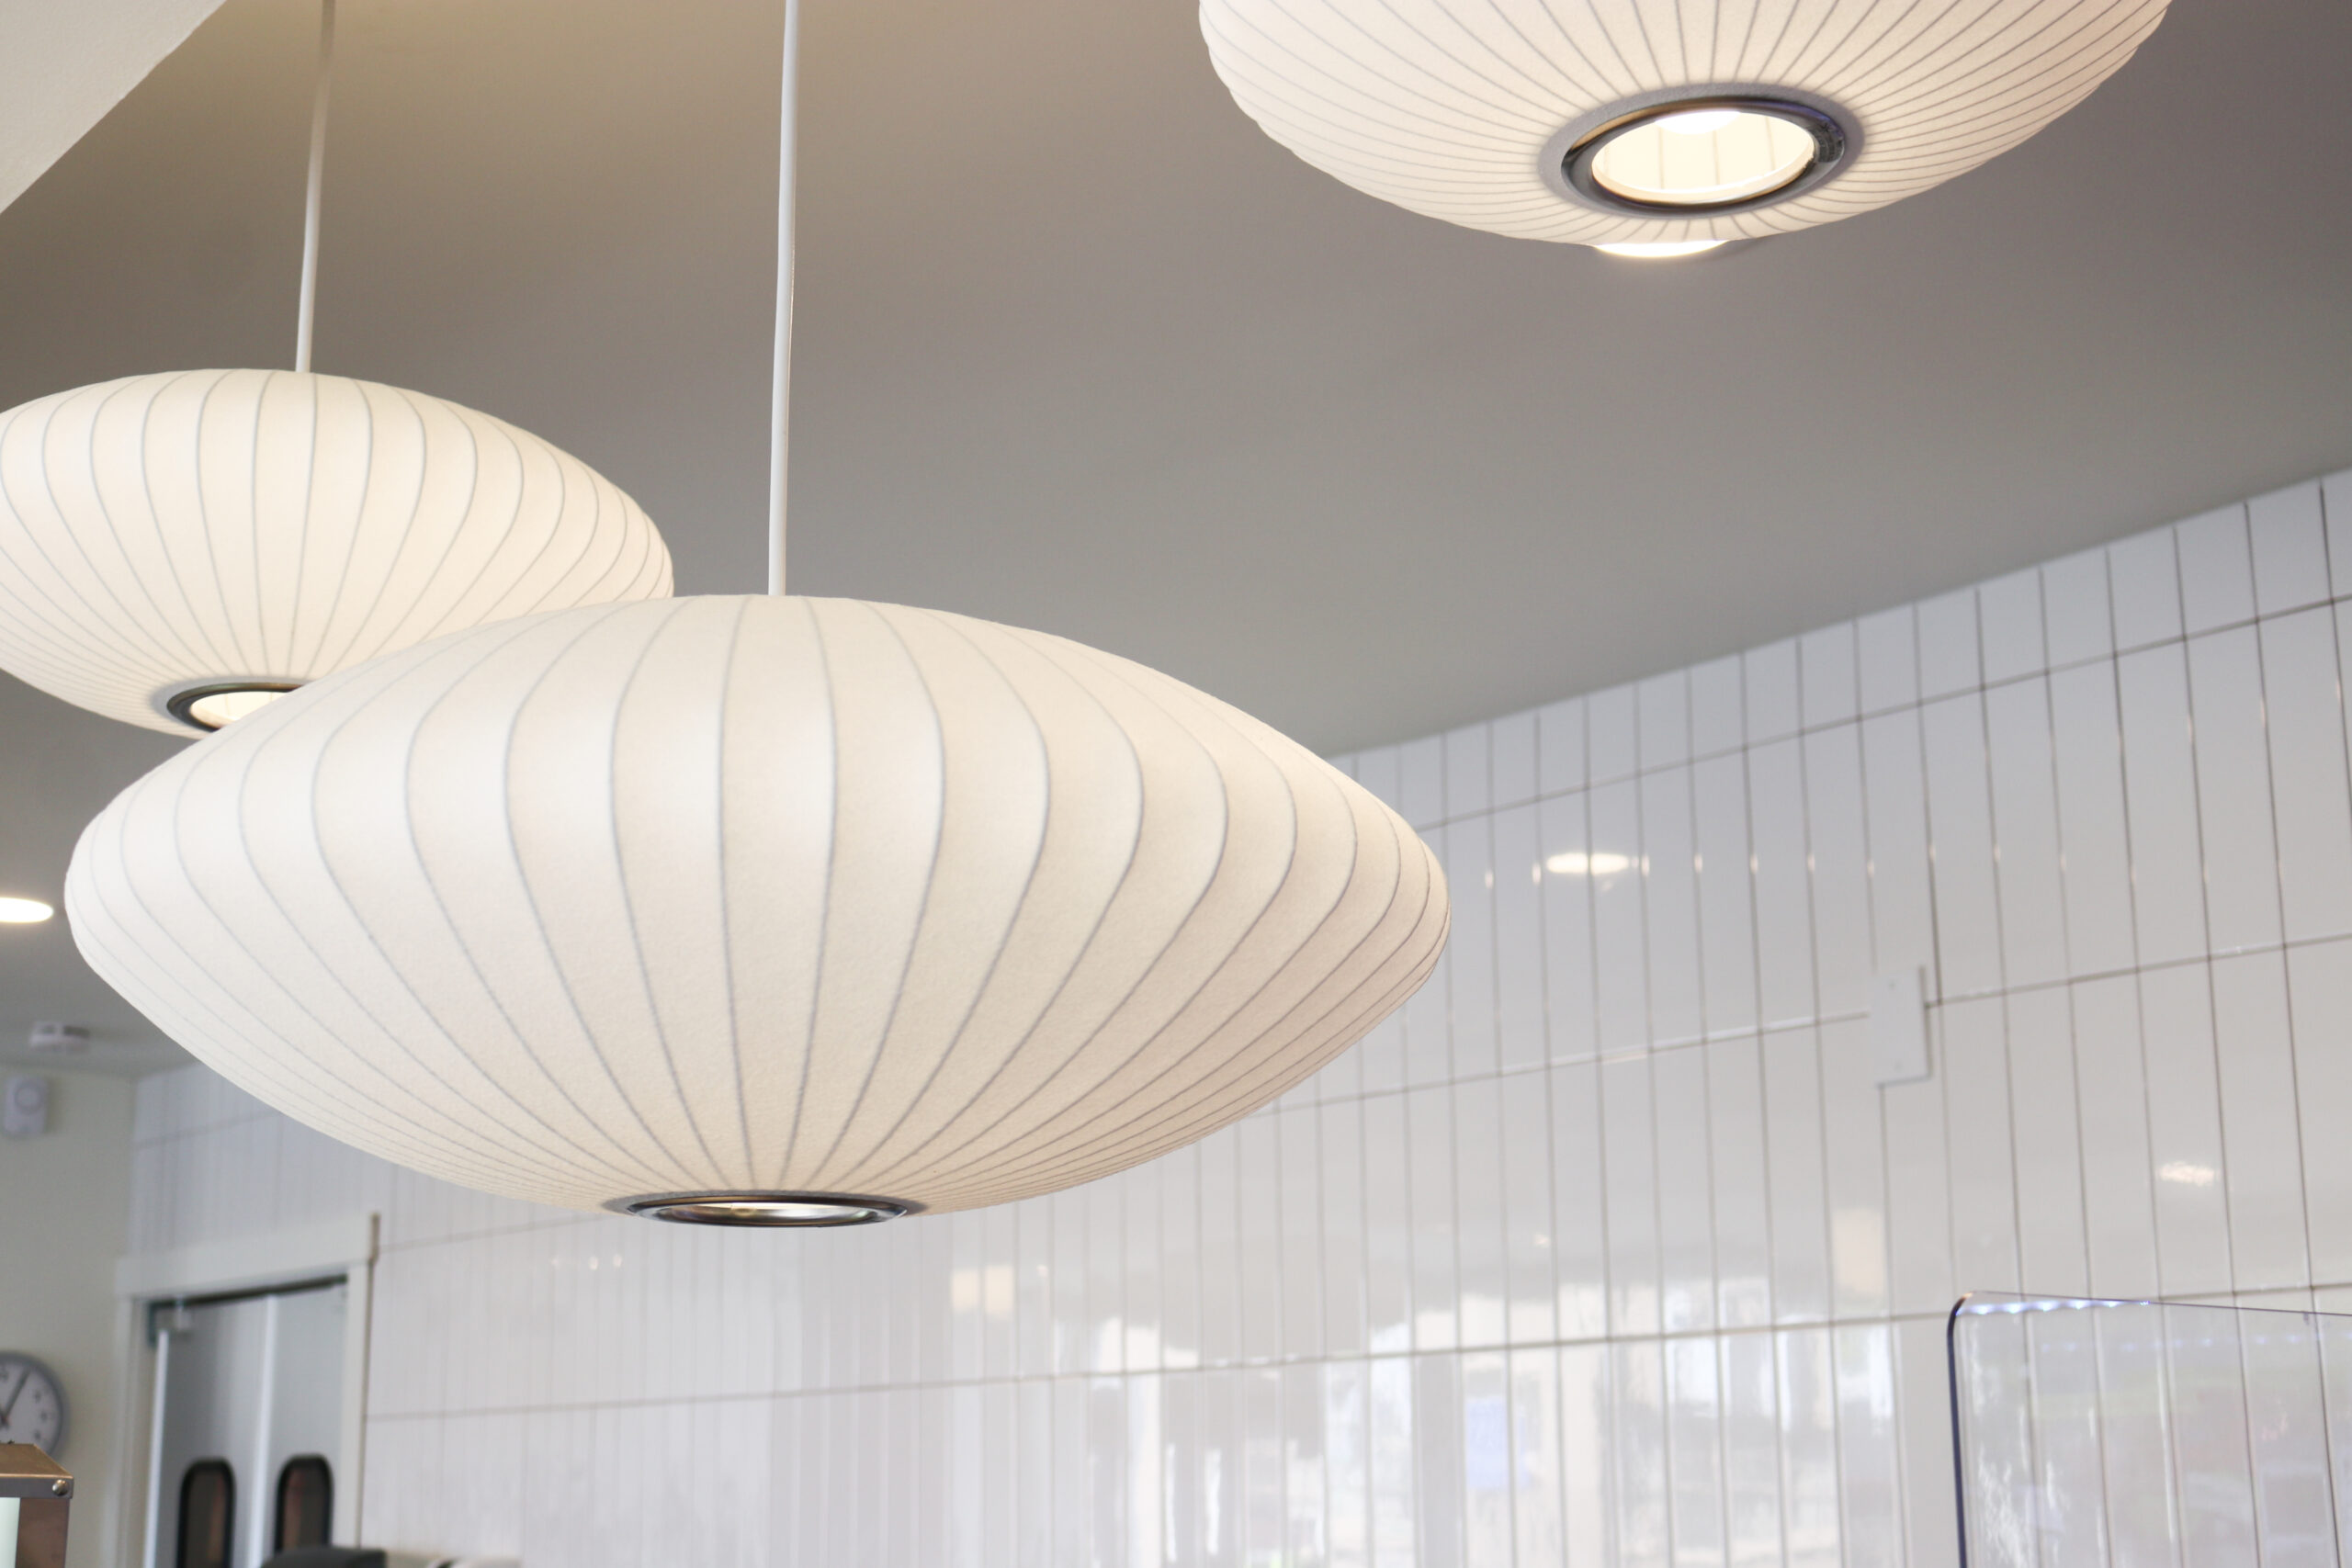 white pendant lights hanging from the ceiling with white tiled walls